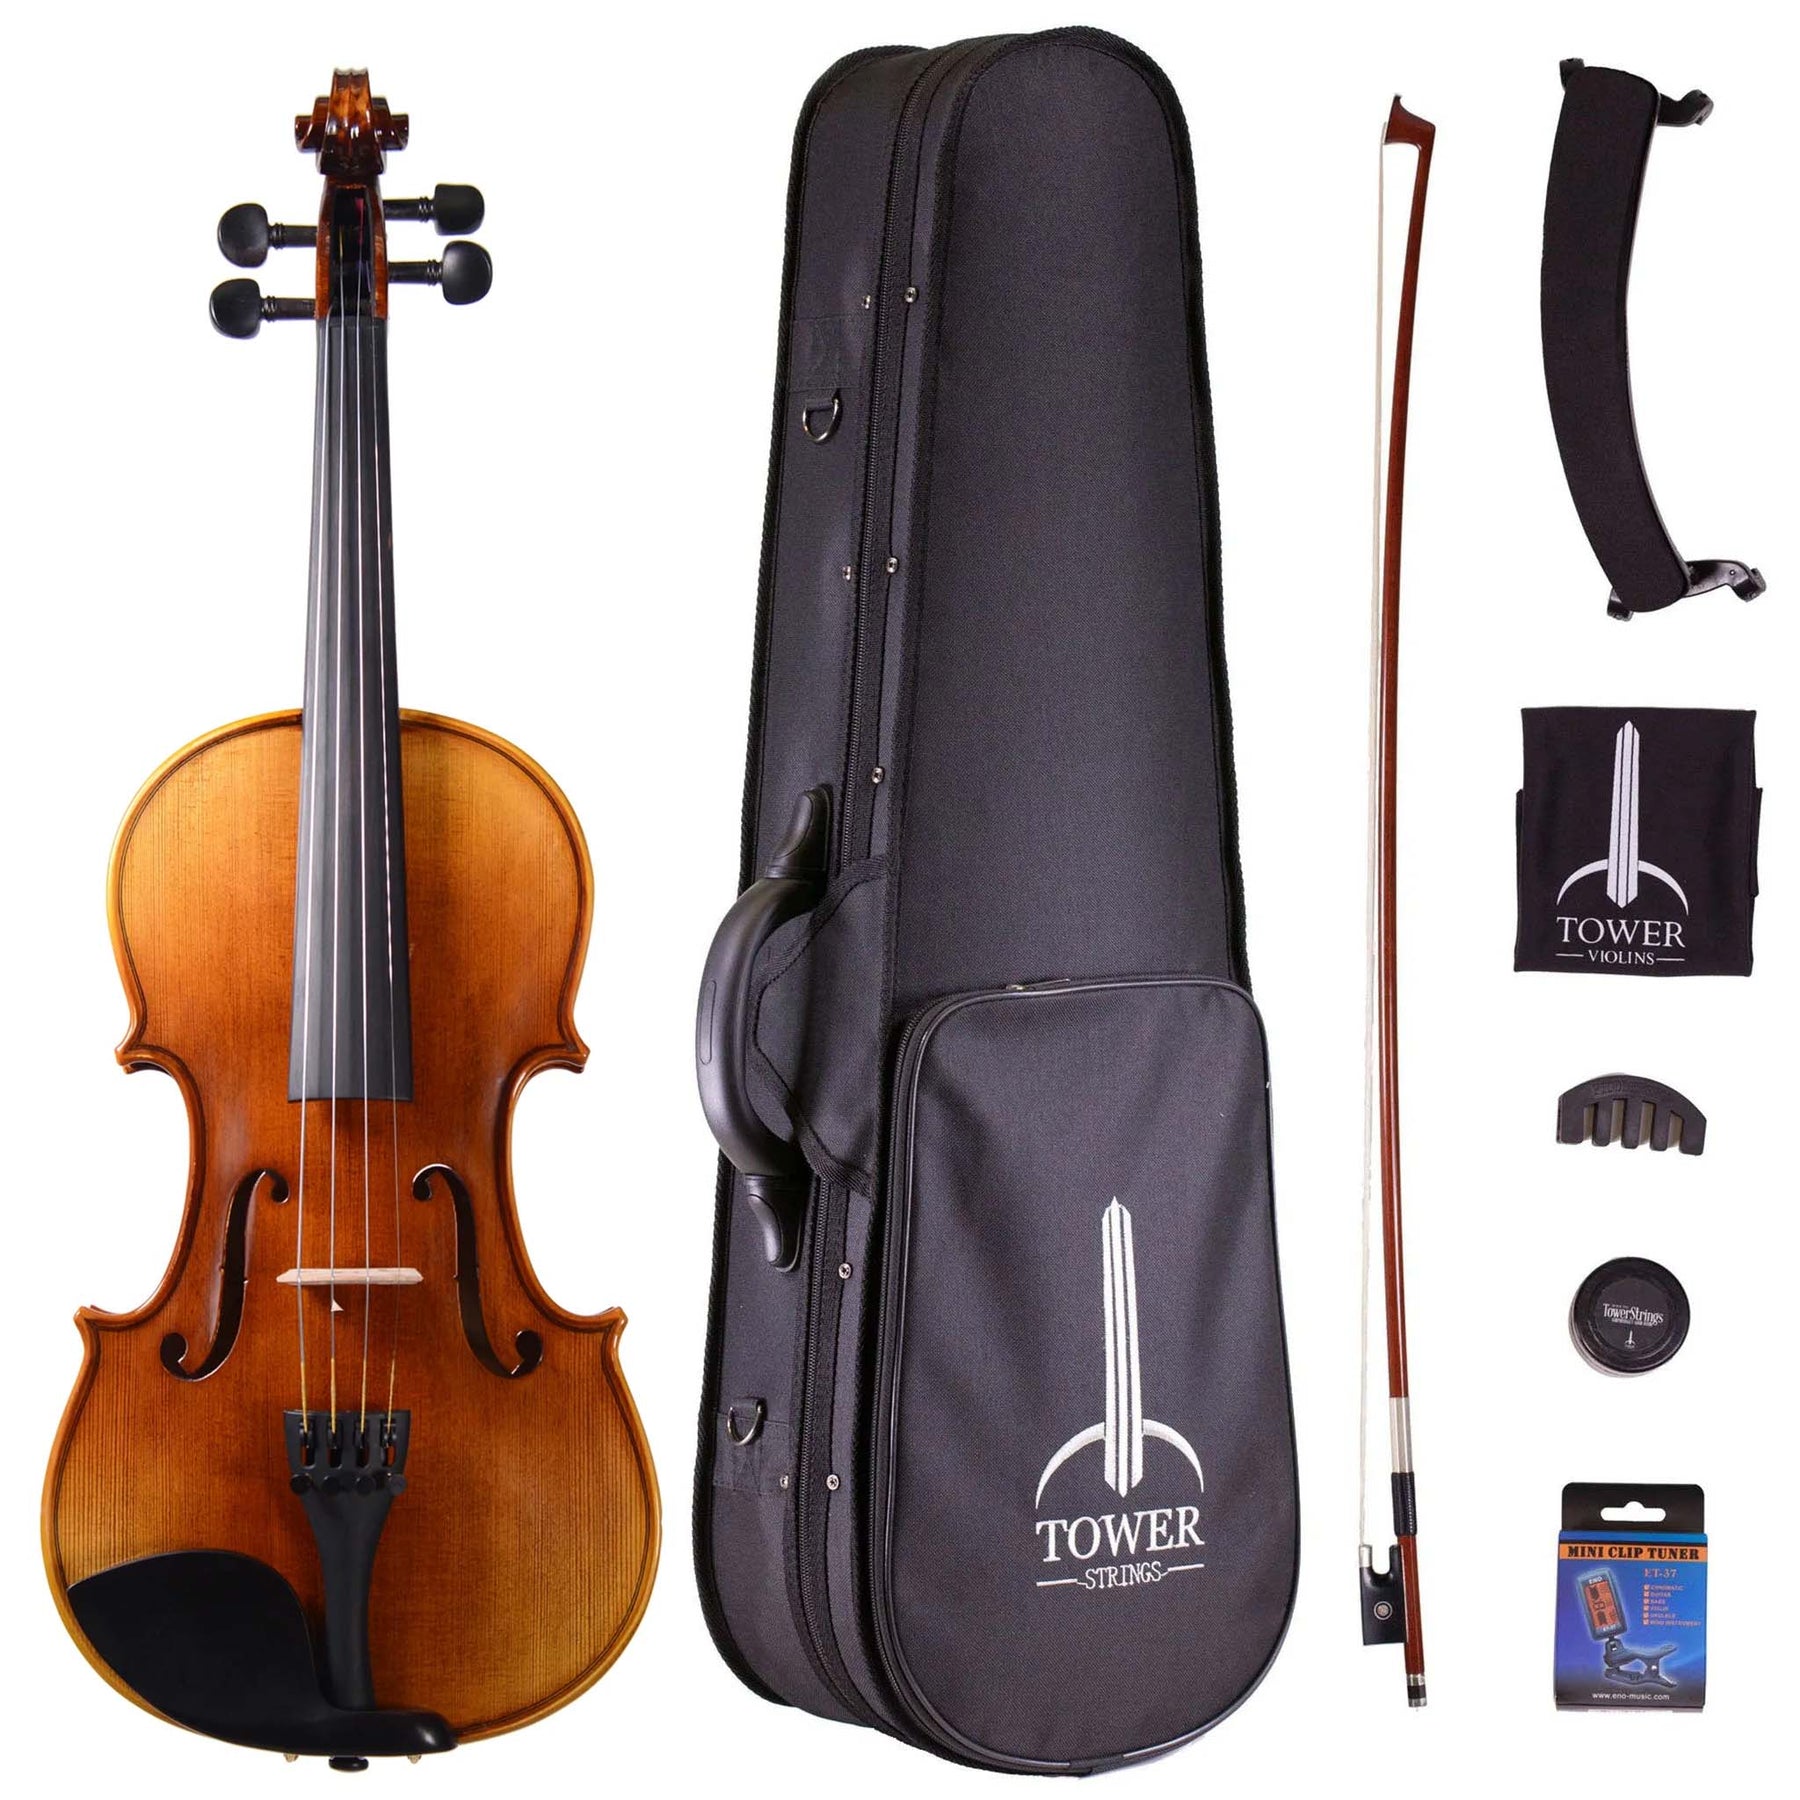 Tower　Strings　Violin　Legend　Outfit